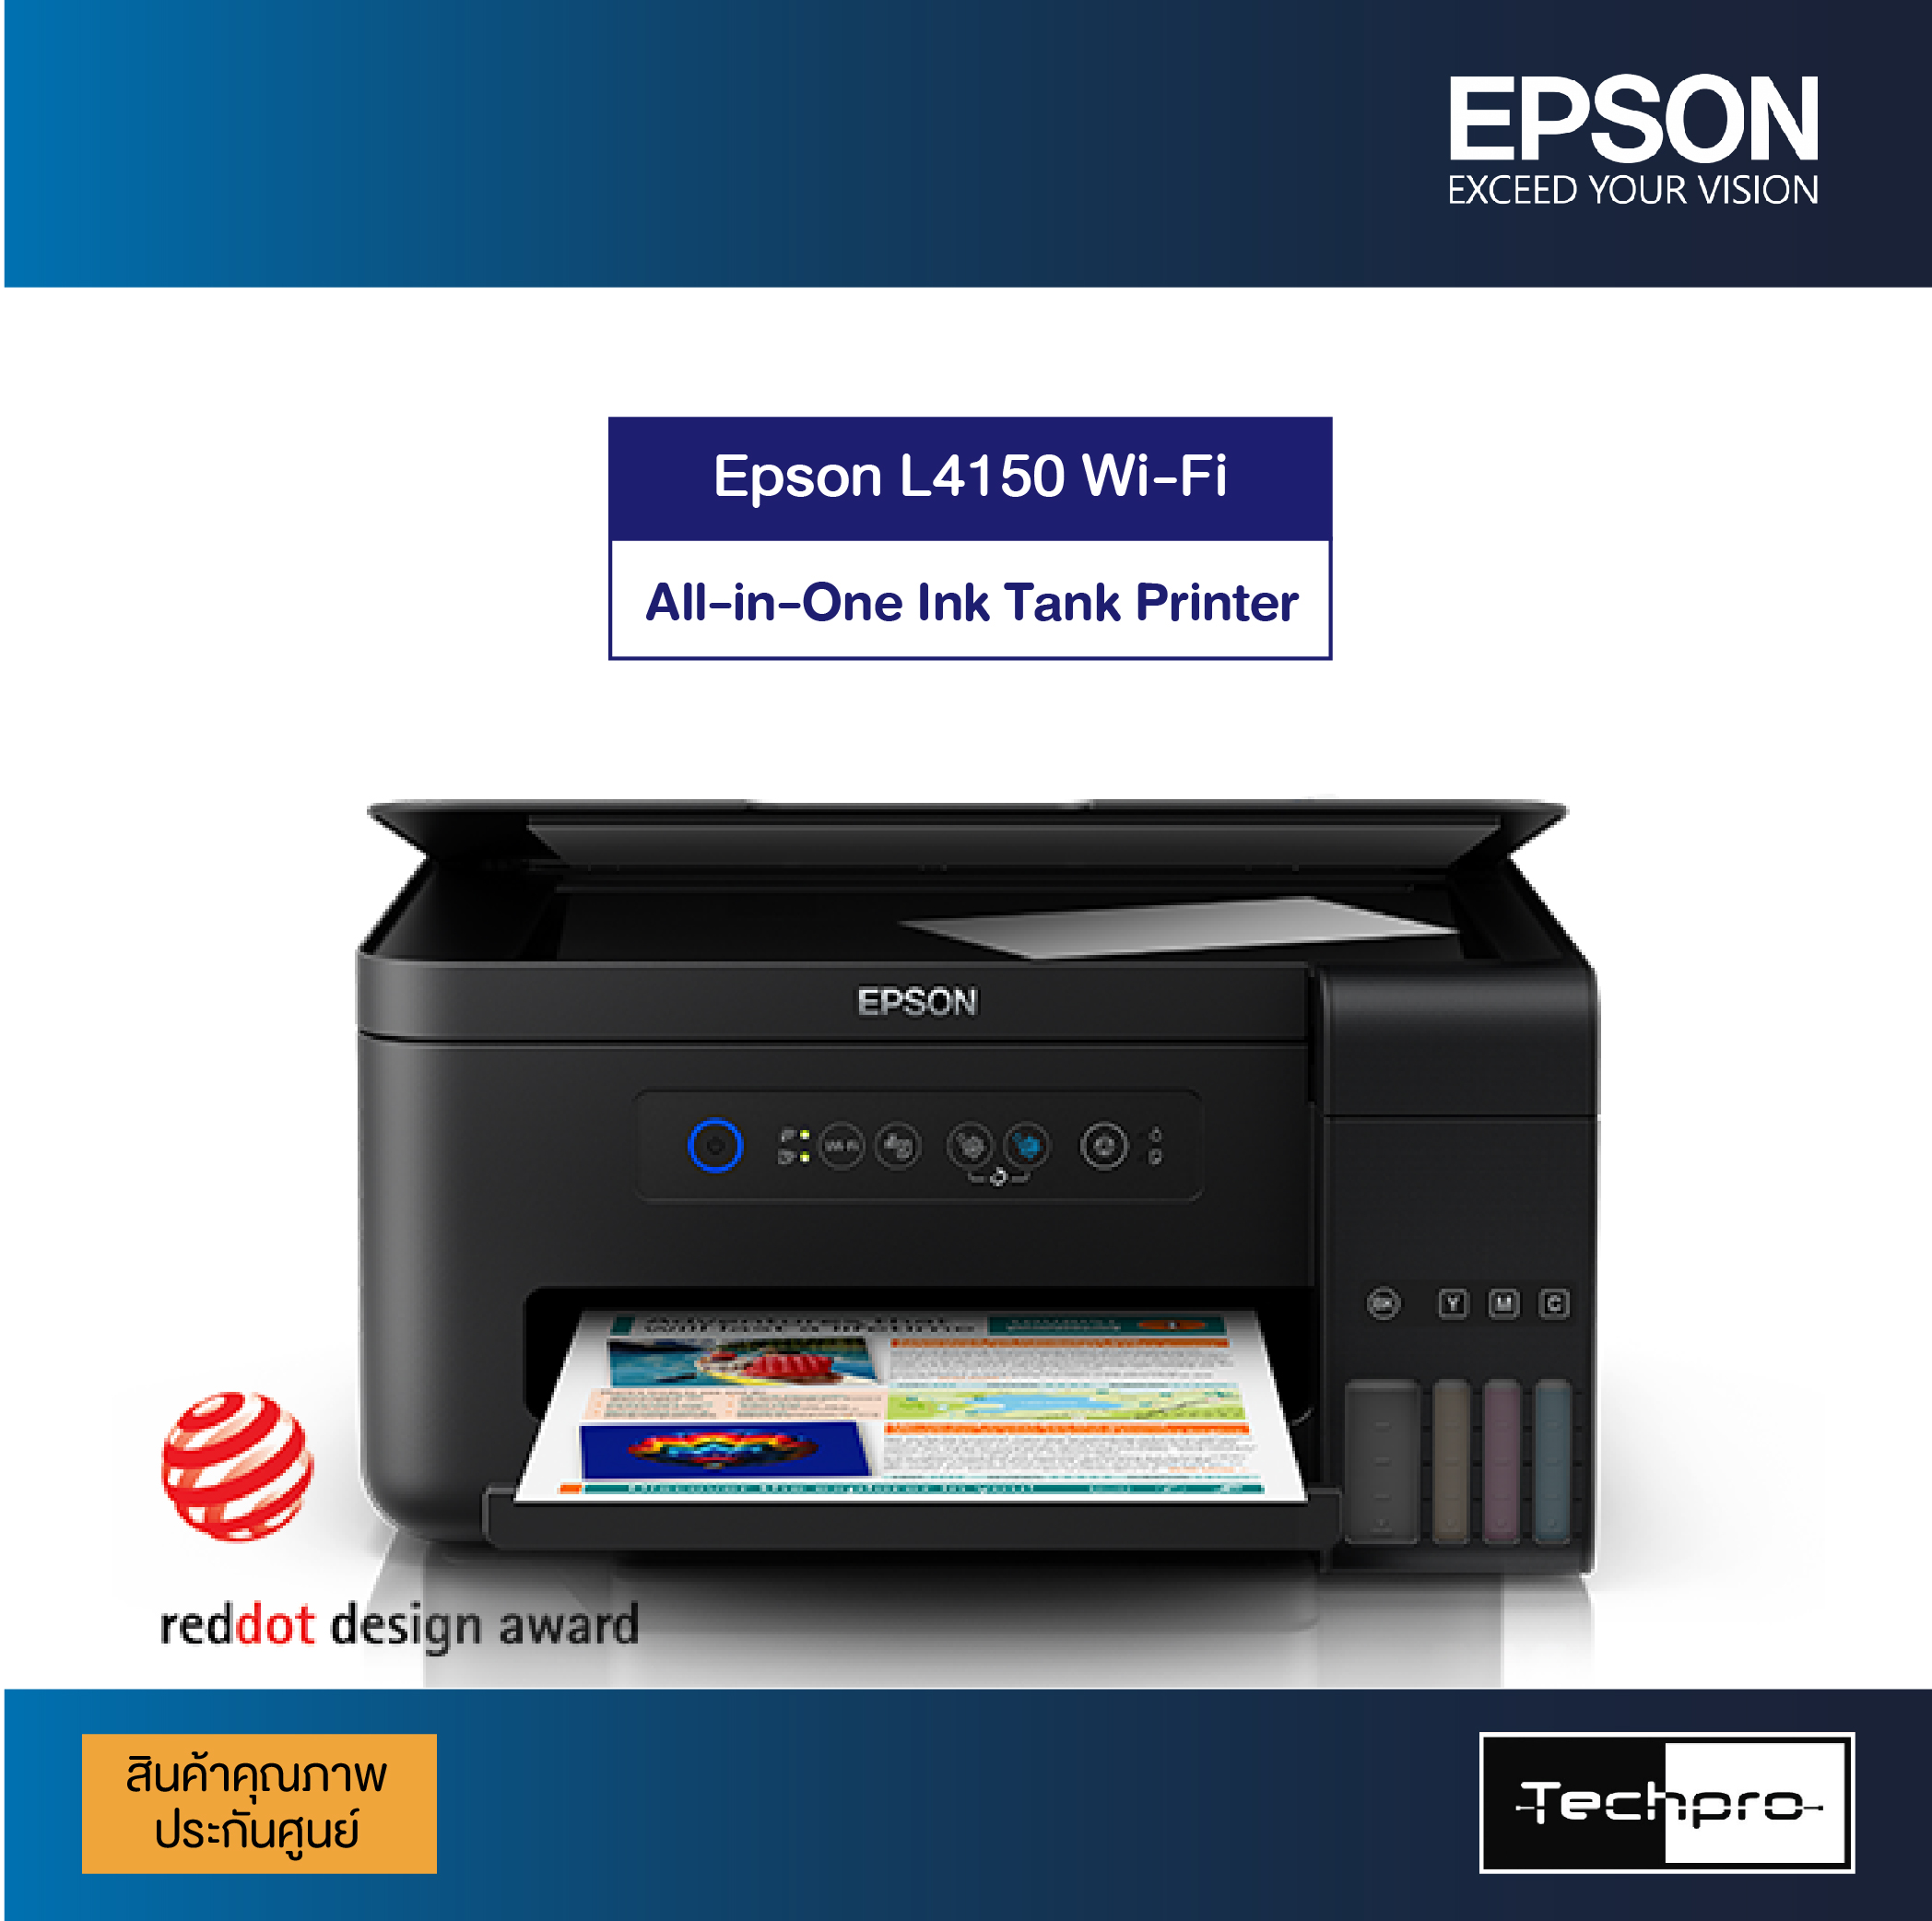 Epson L4150 Wi Fi All In One Ink Tank Printer Techpro 6729